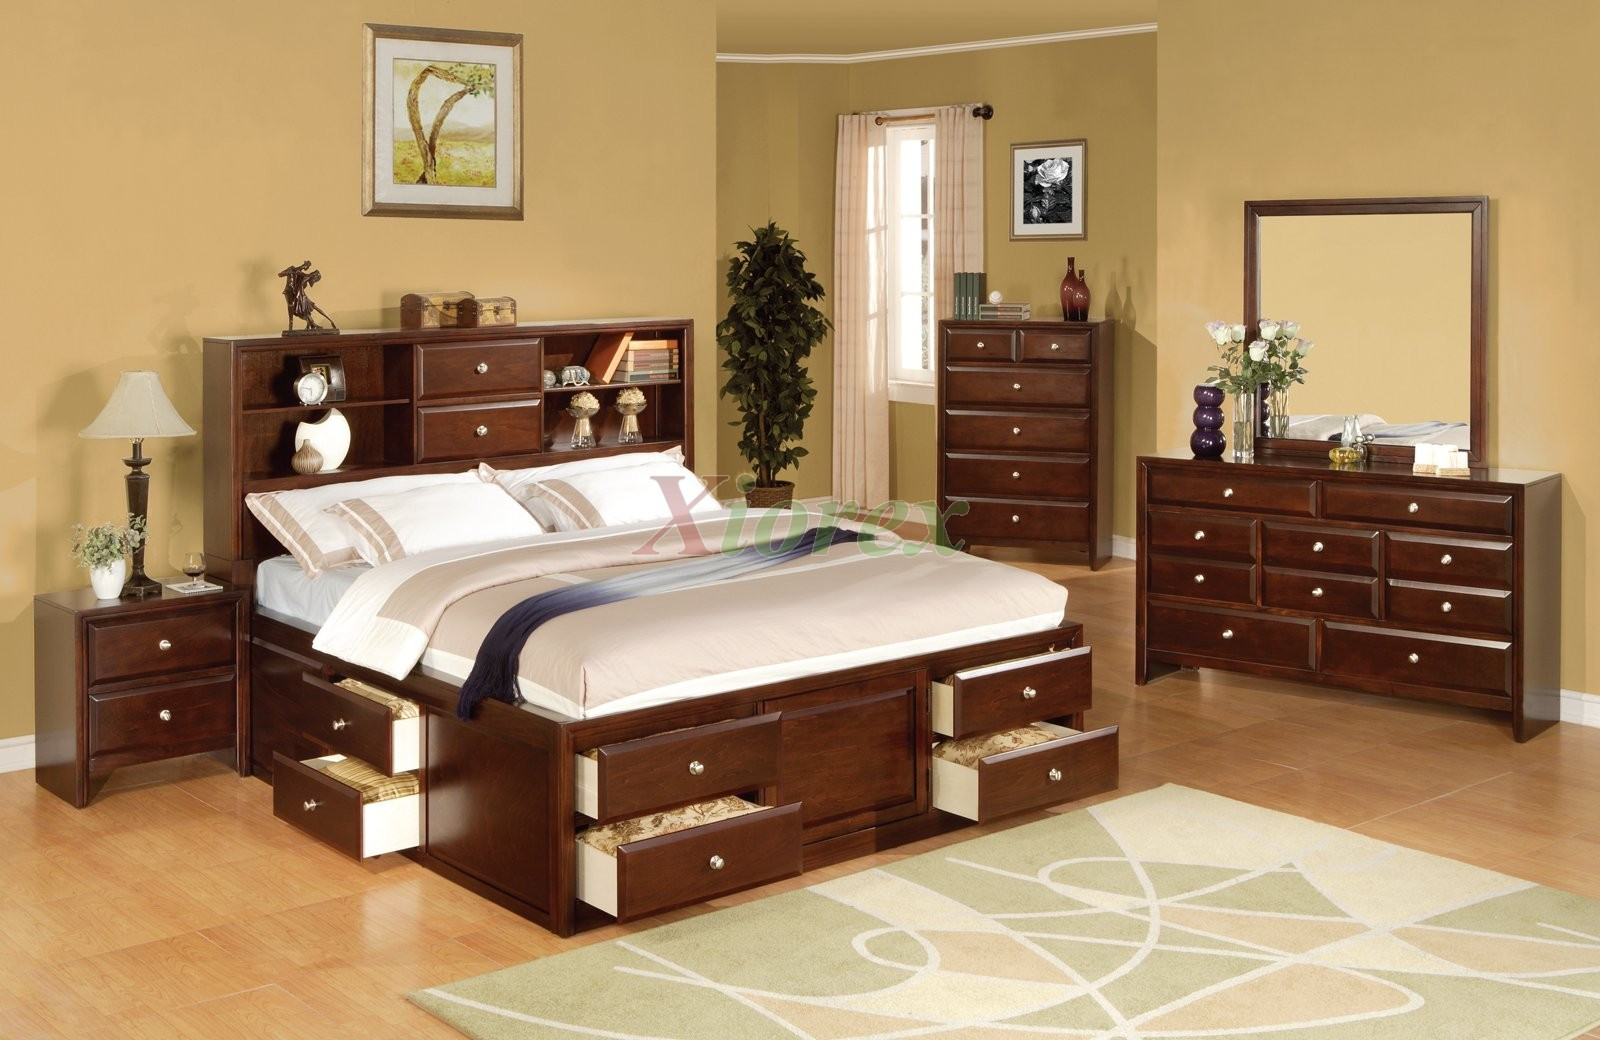 Bedroom Sets With Storage
 A Lot of Bedroom Storage Ideas for the Better yet Well